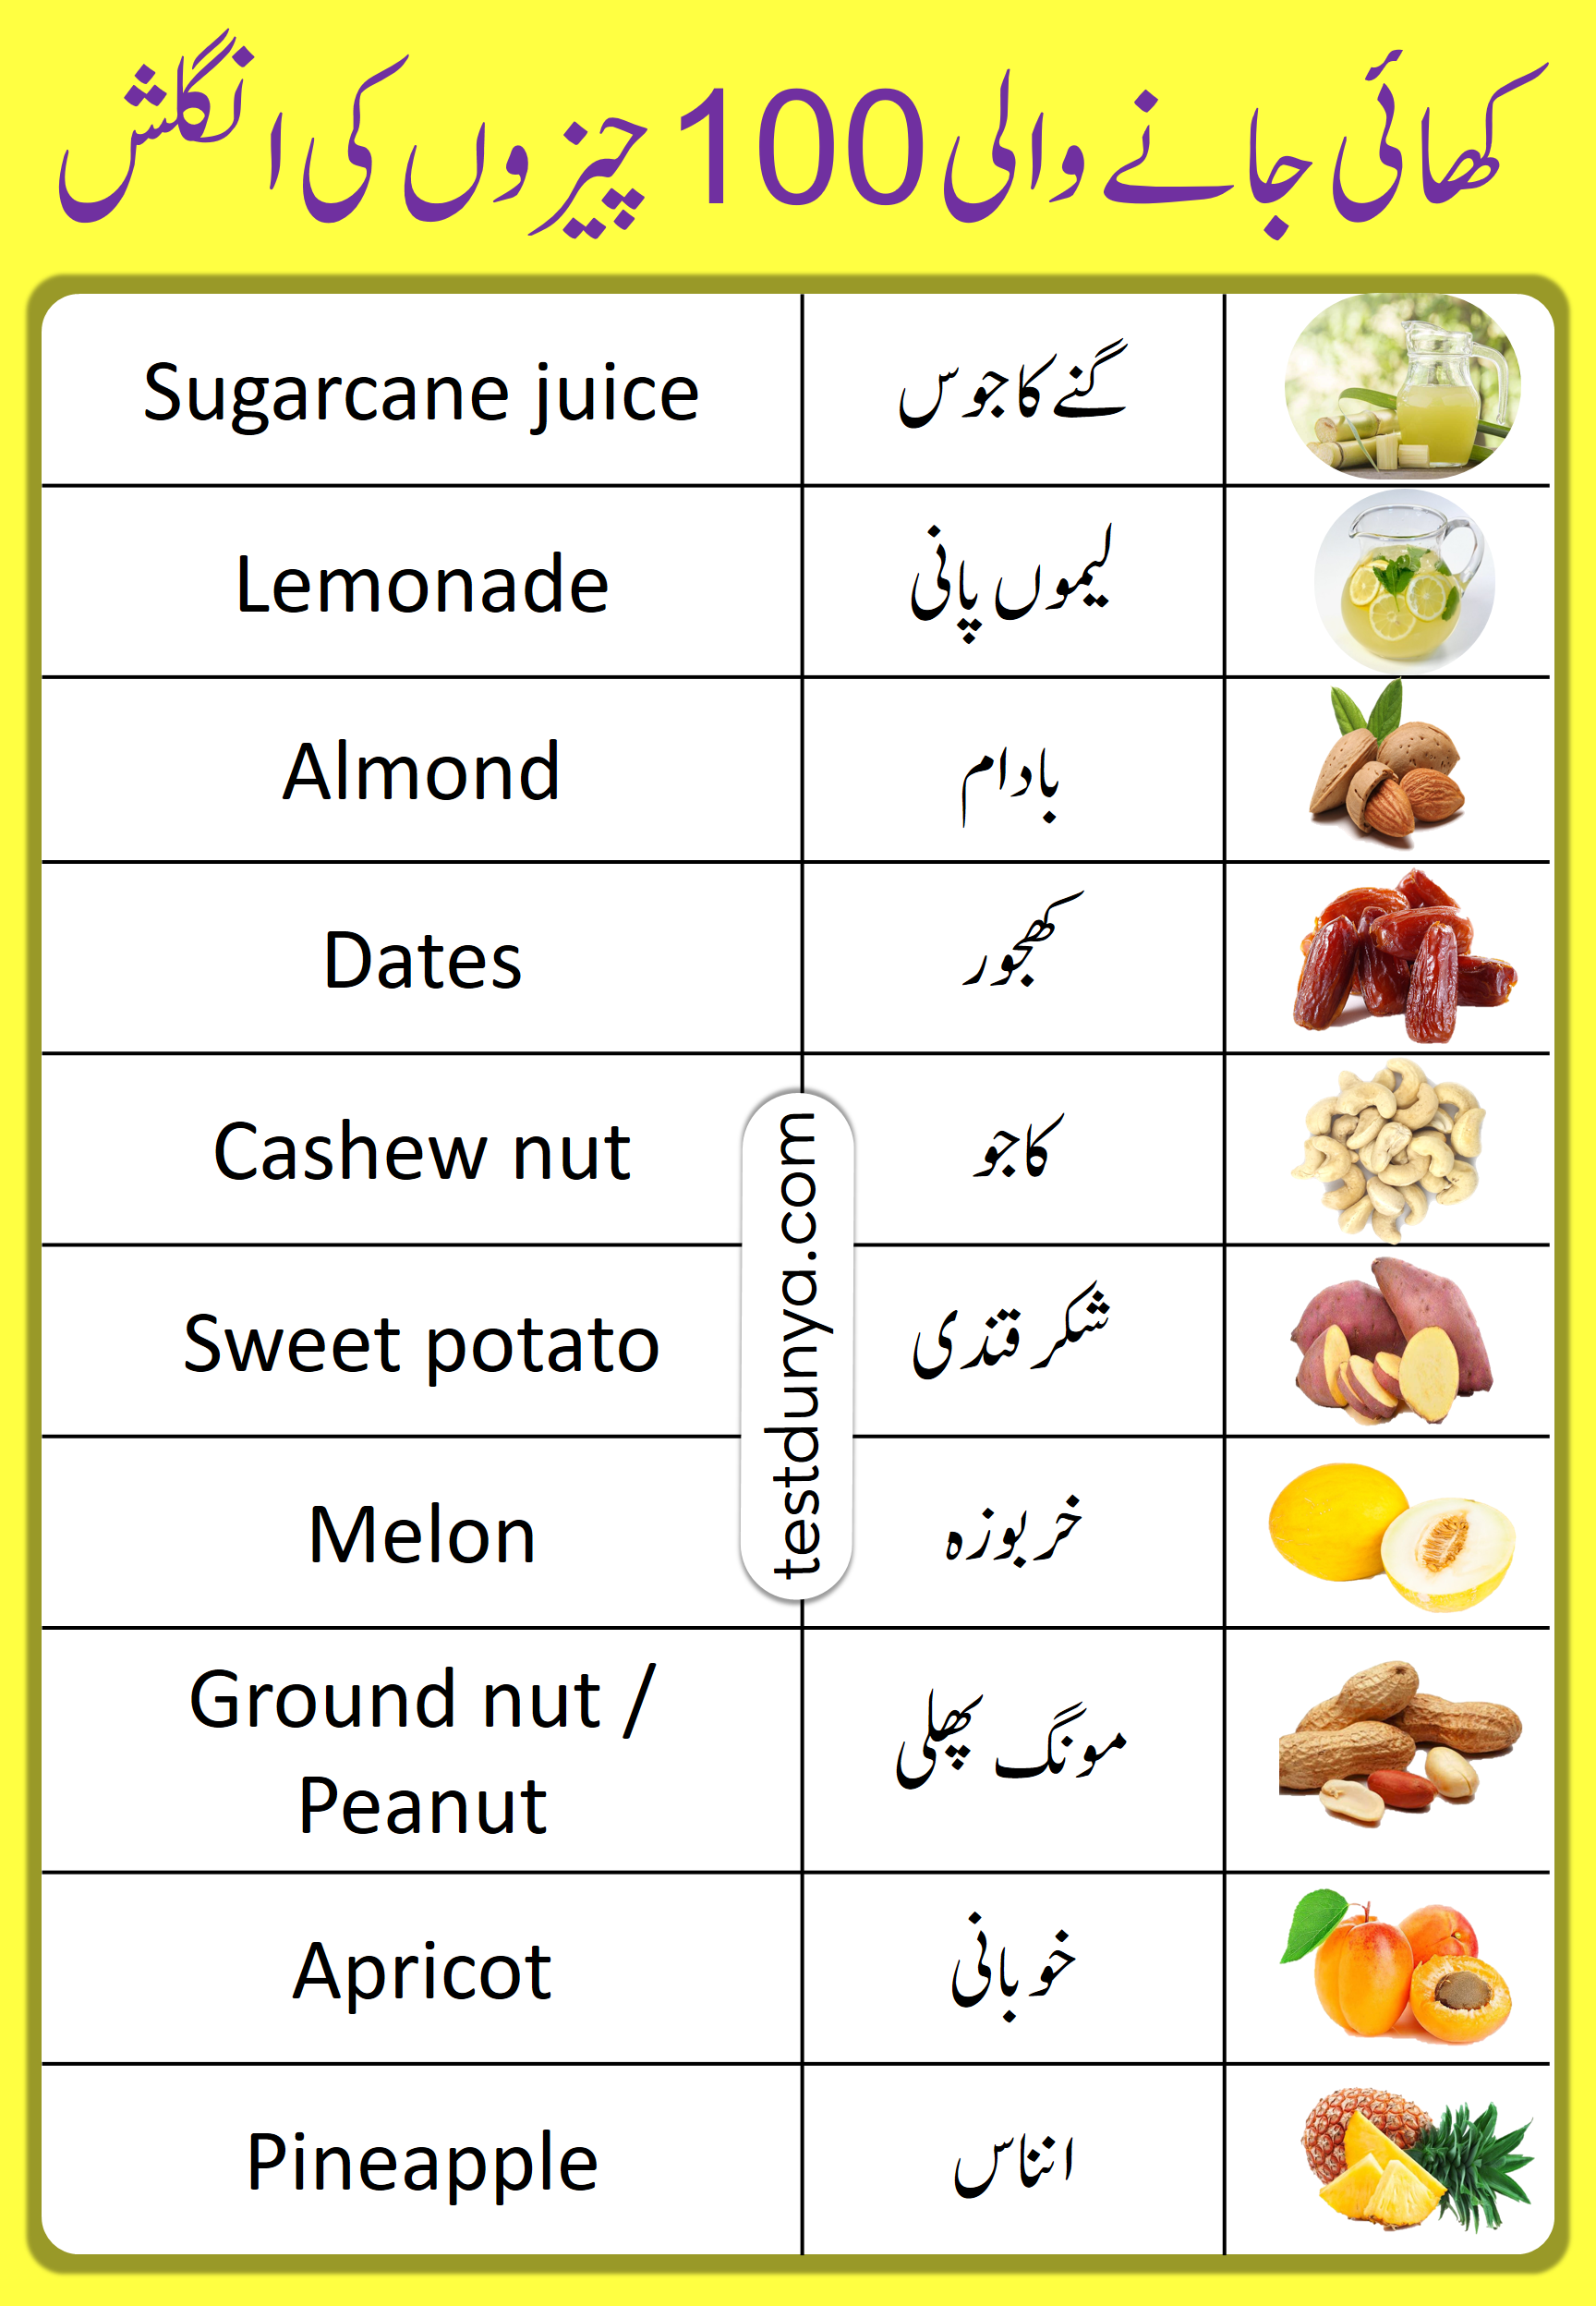 Eatable Things Name In English With Urdu Meanings #for #foryou #viral